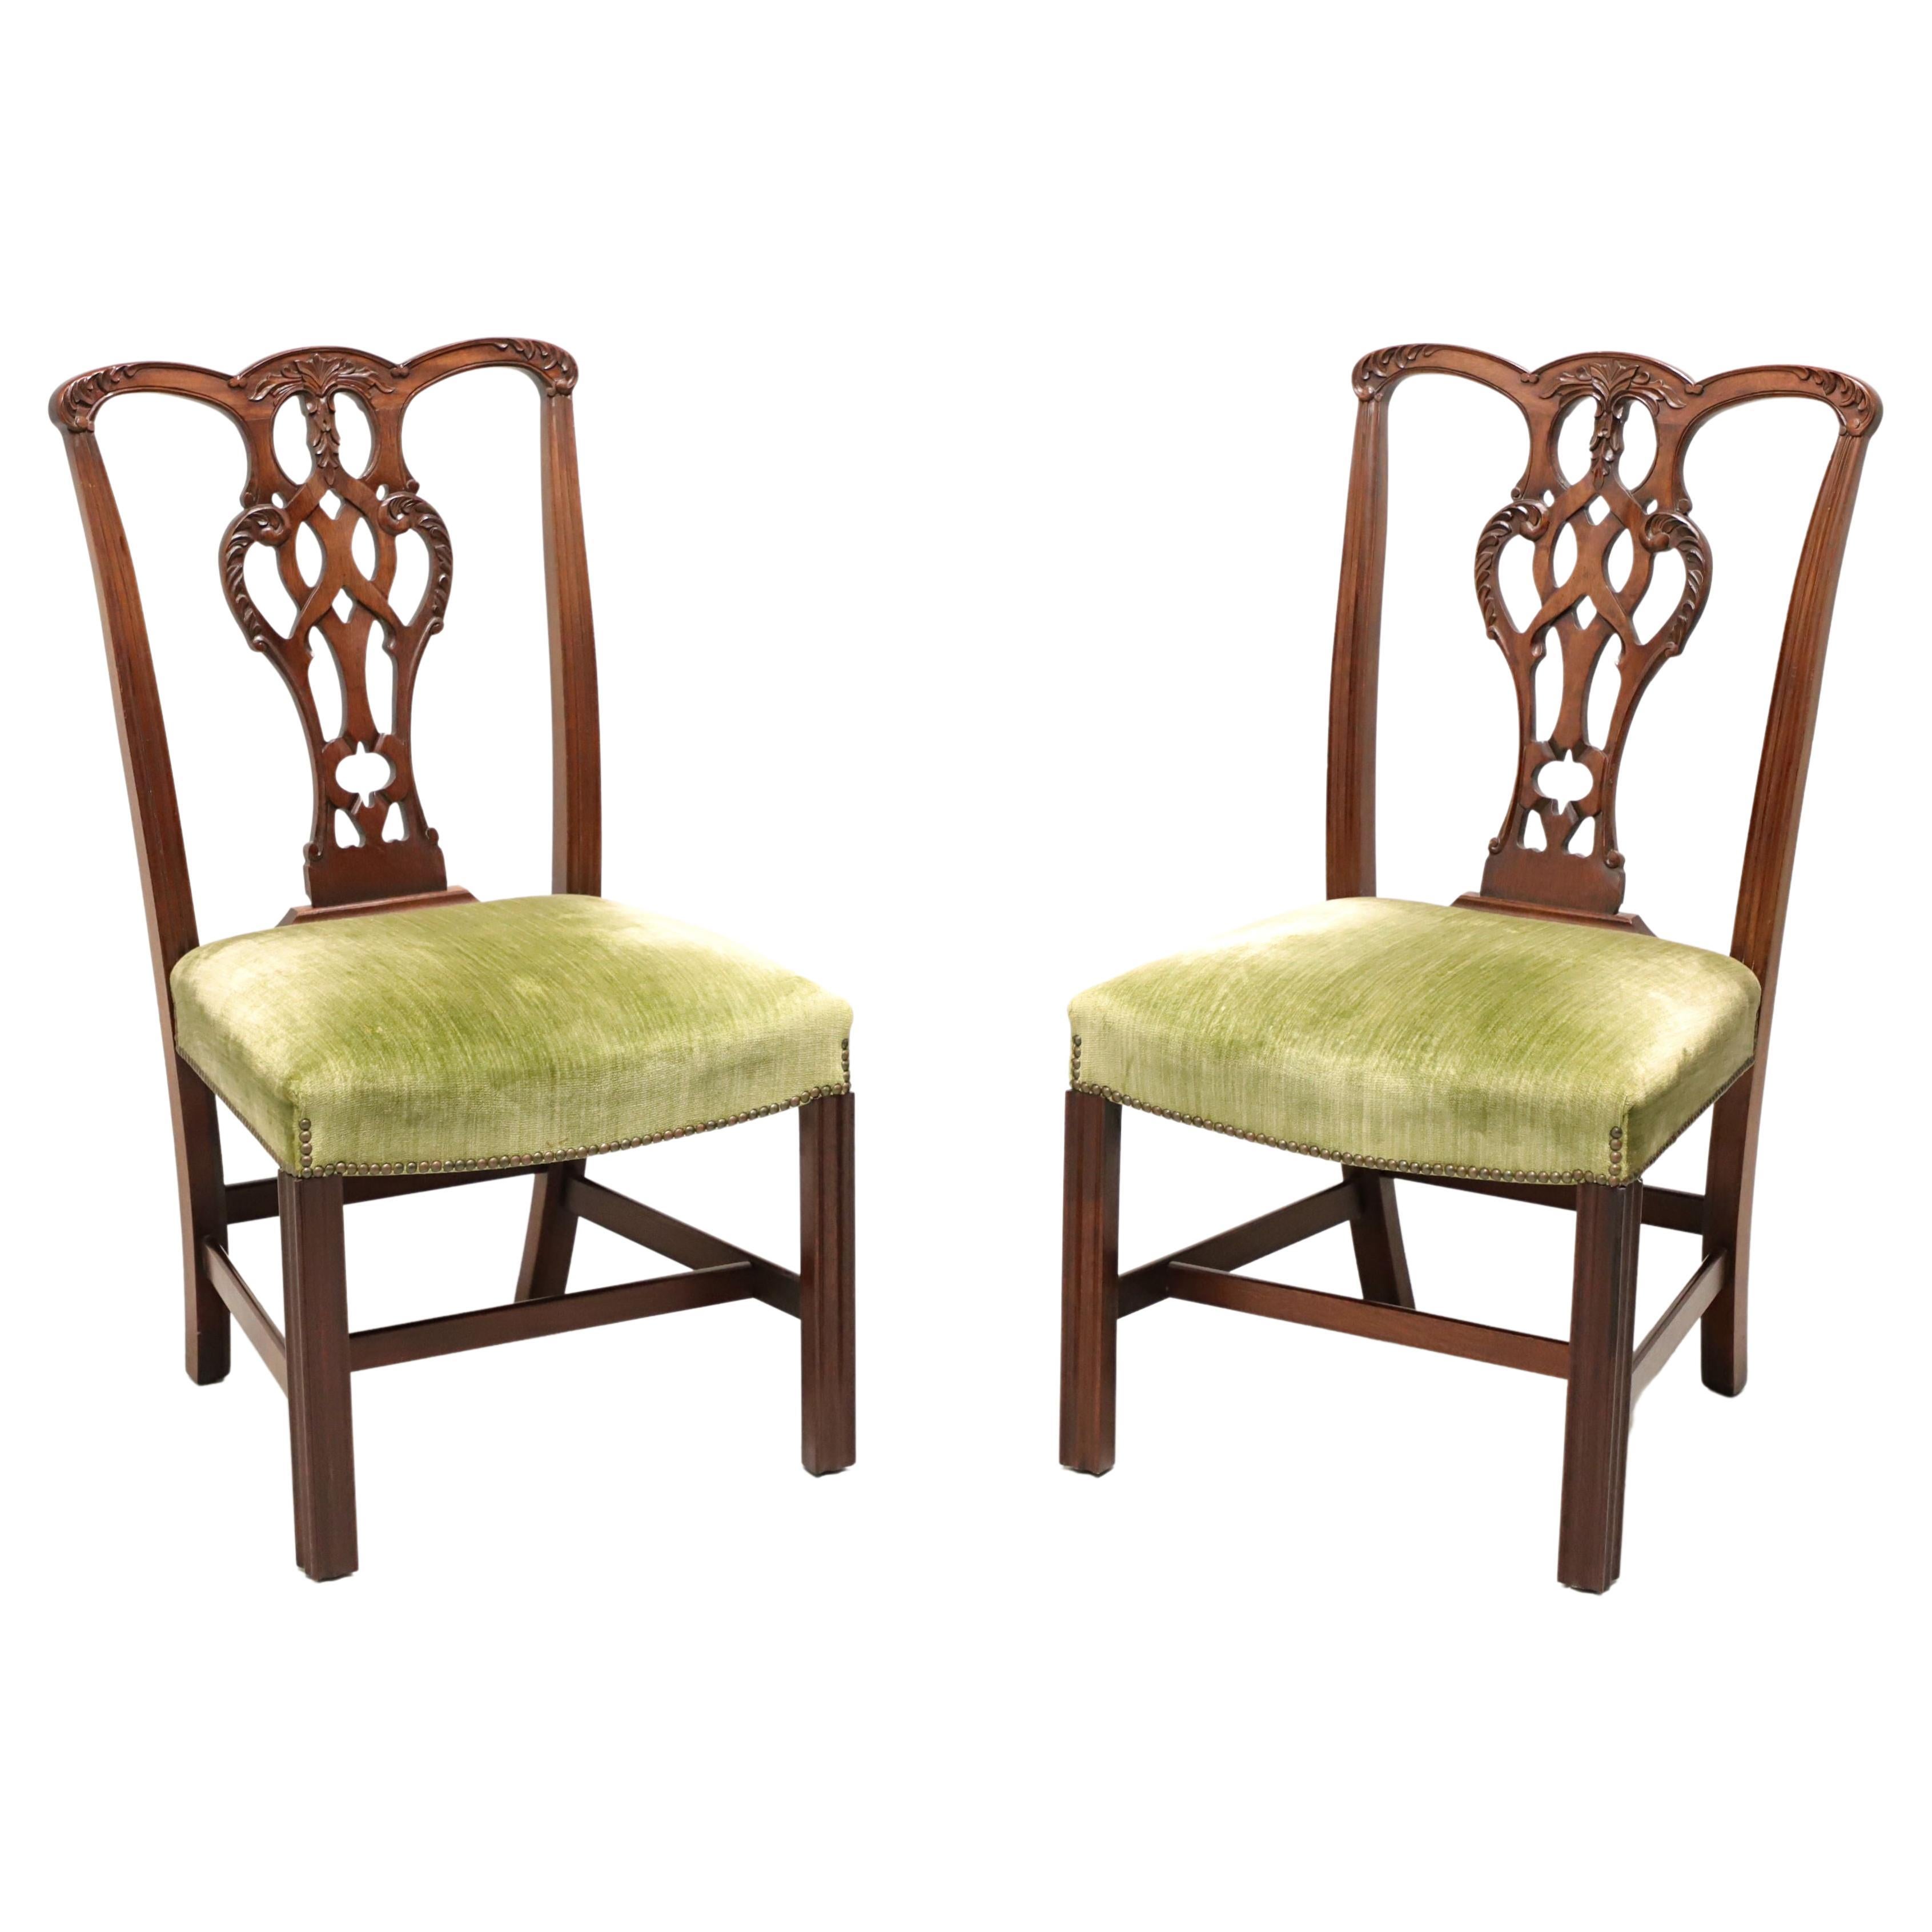 CRAFTIQUE Mahogany Chippendale Style Straight Leg Dining Side Chairs - Pair C For Sale